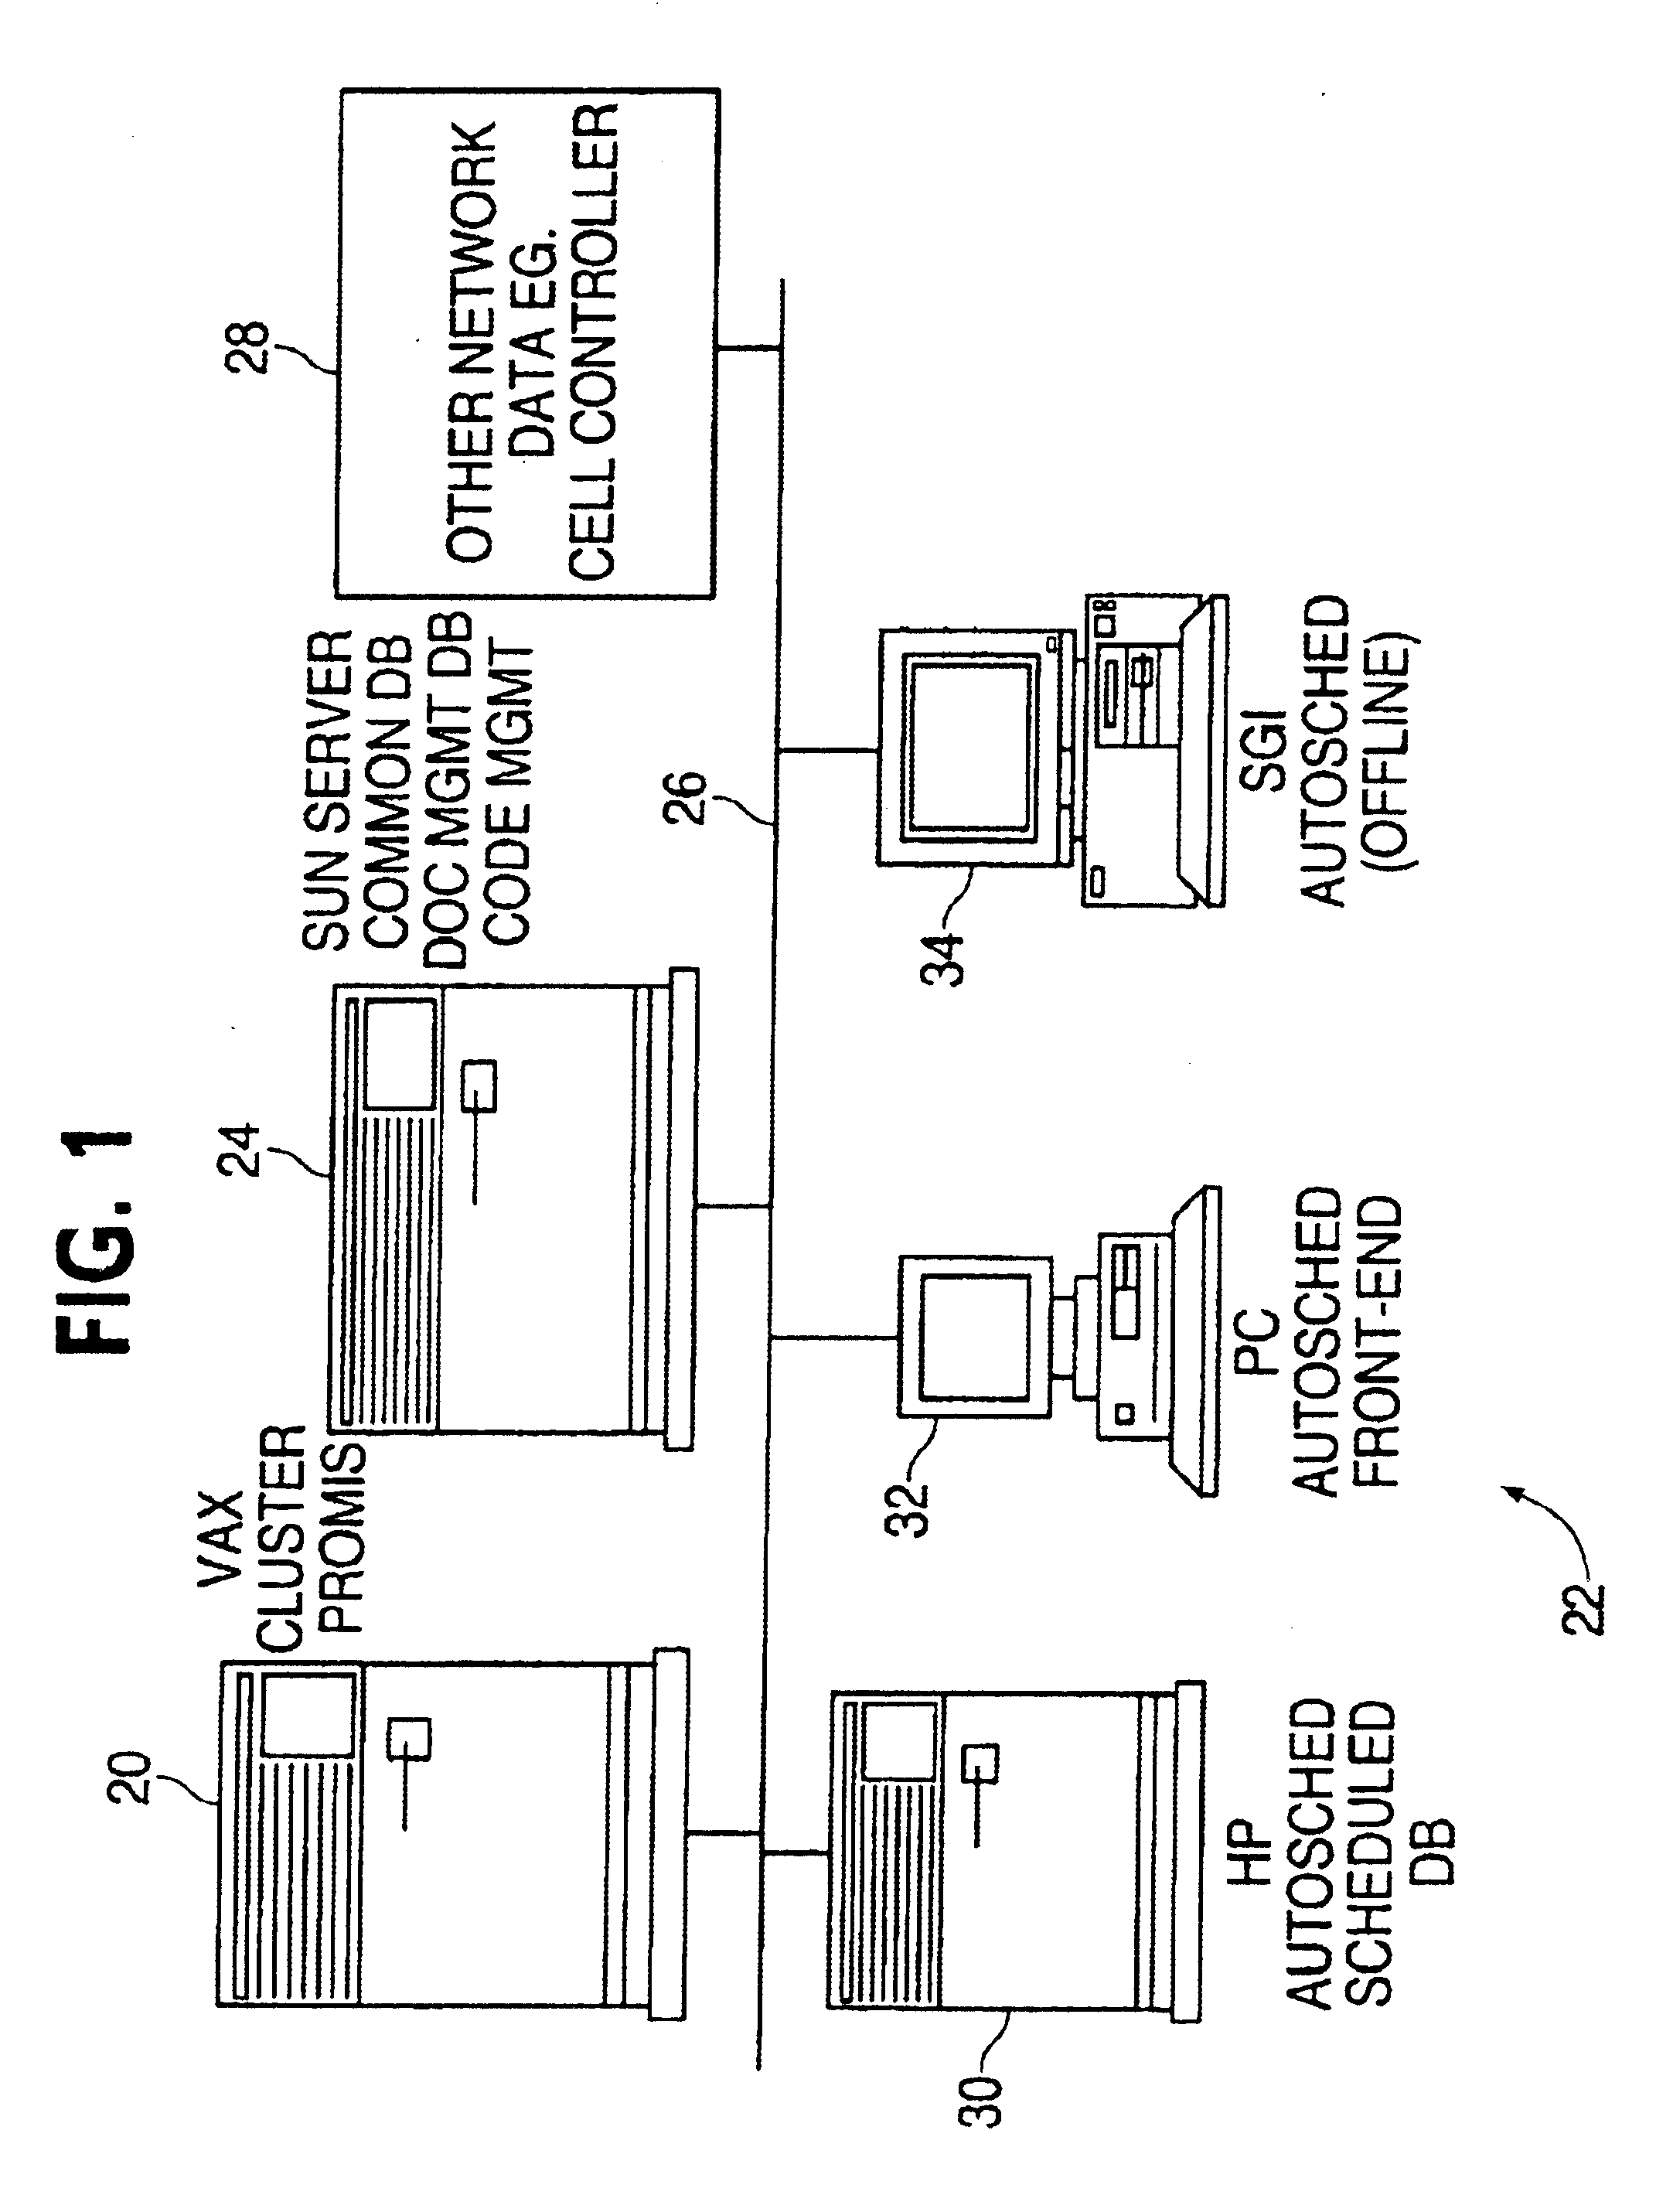 Integrated wafer fabrication production characterization and scheduling system